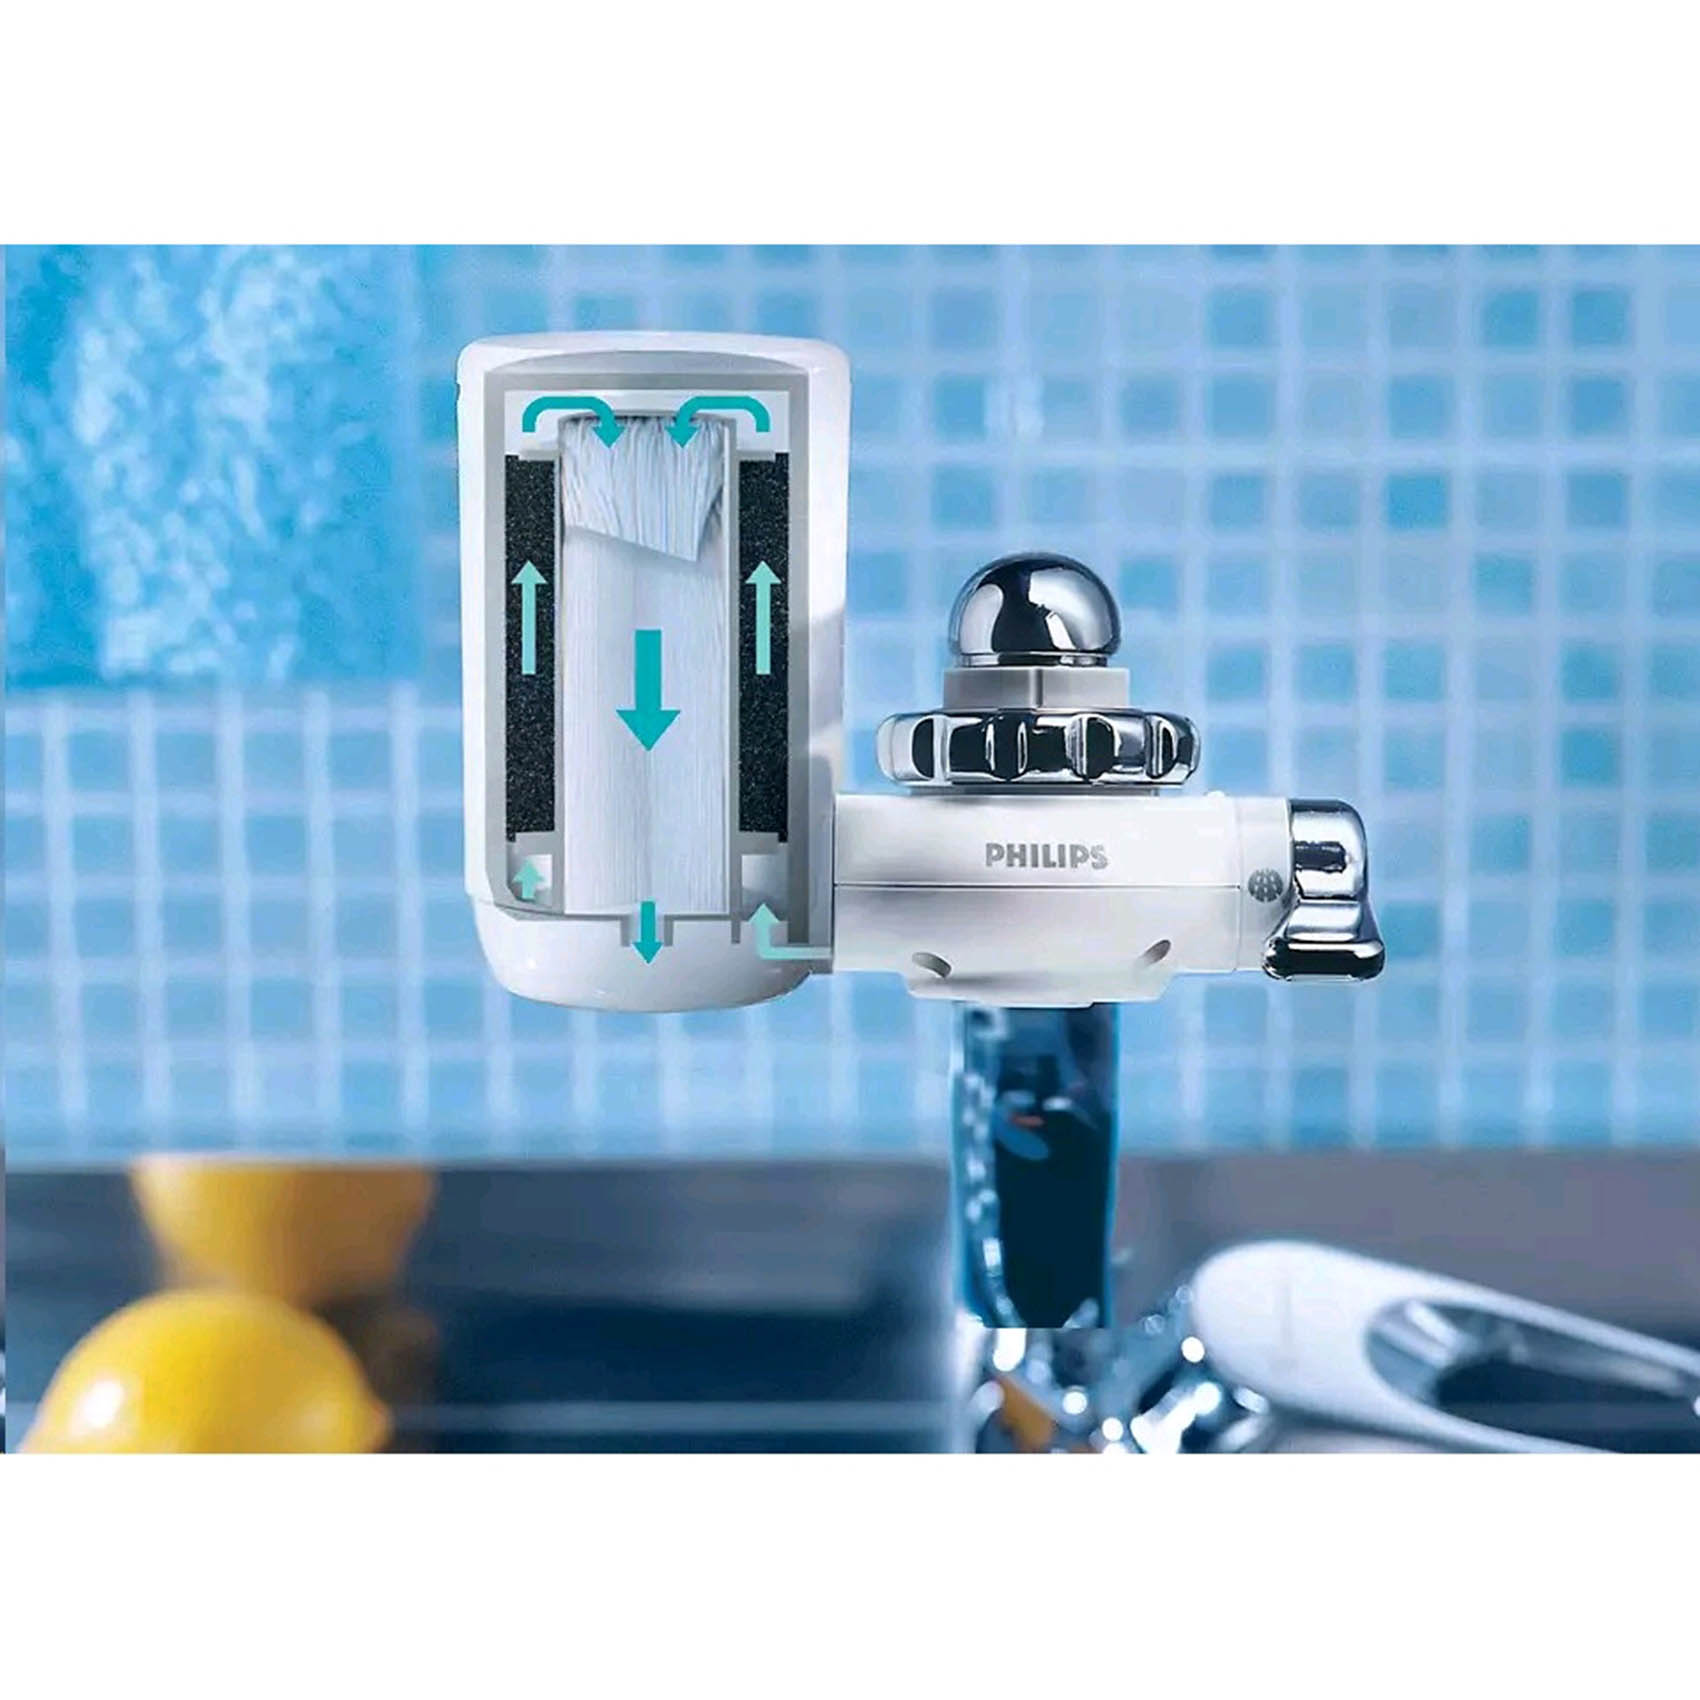 On tap water purifier WP3861/00